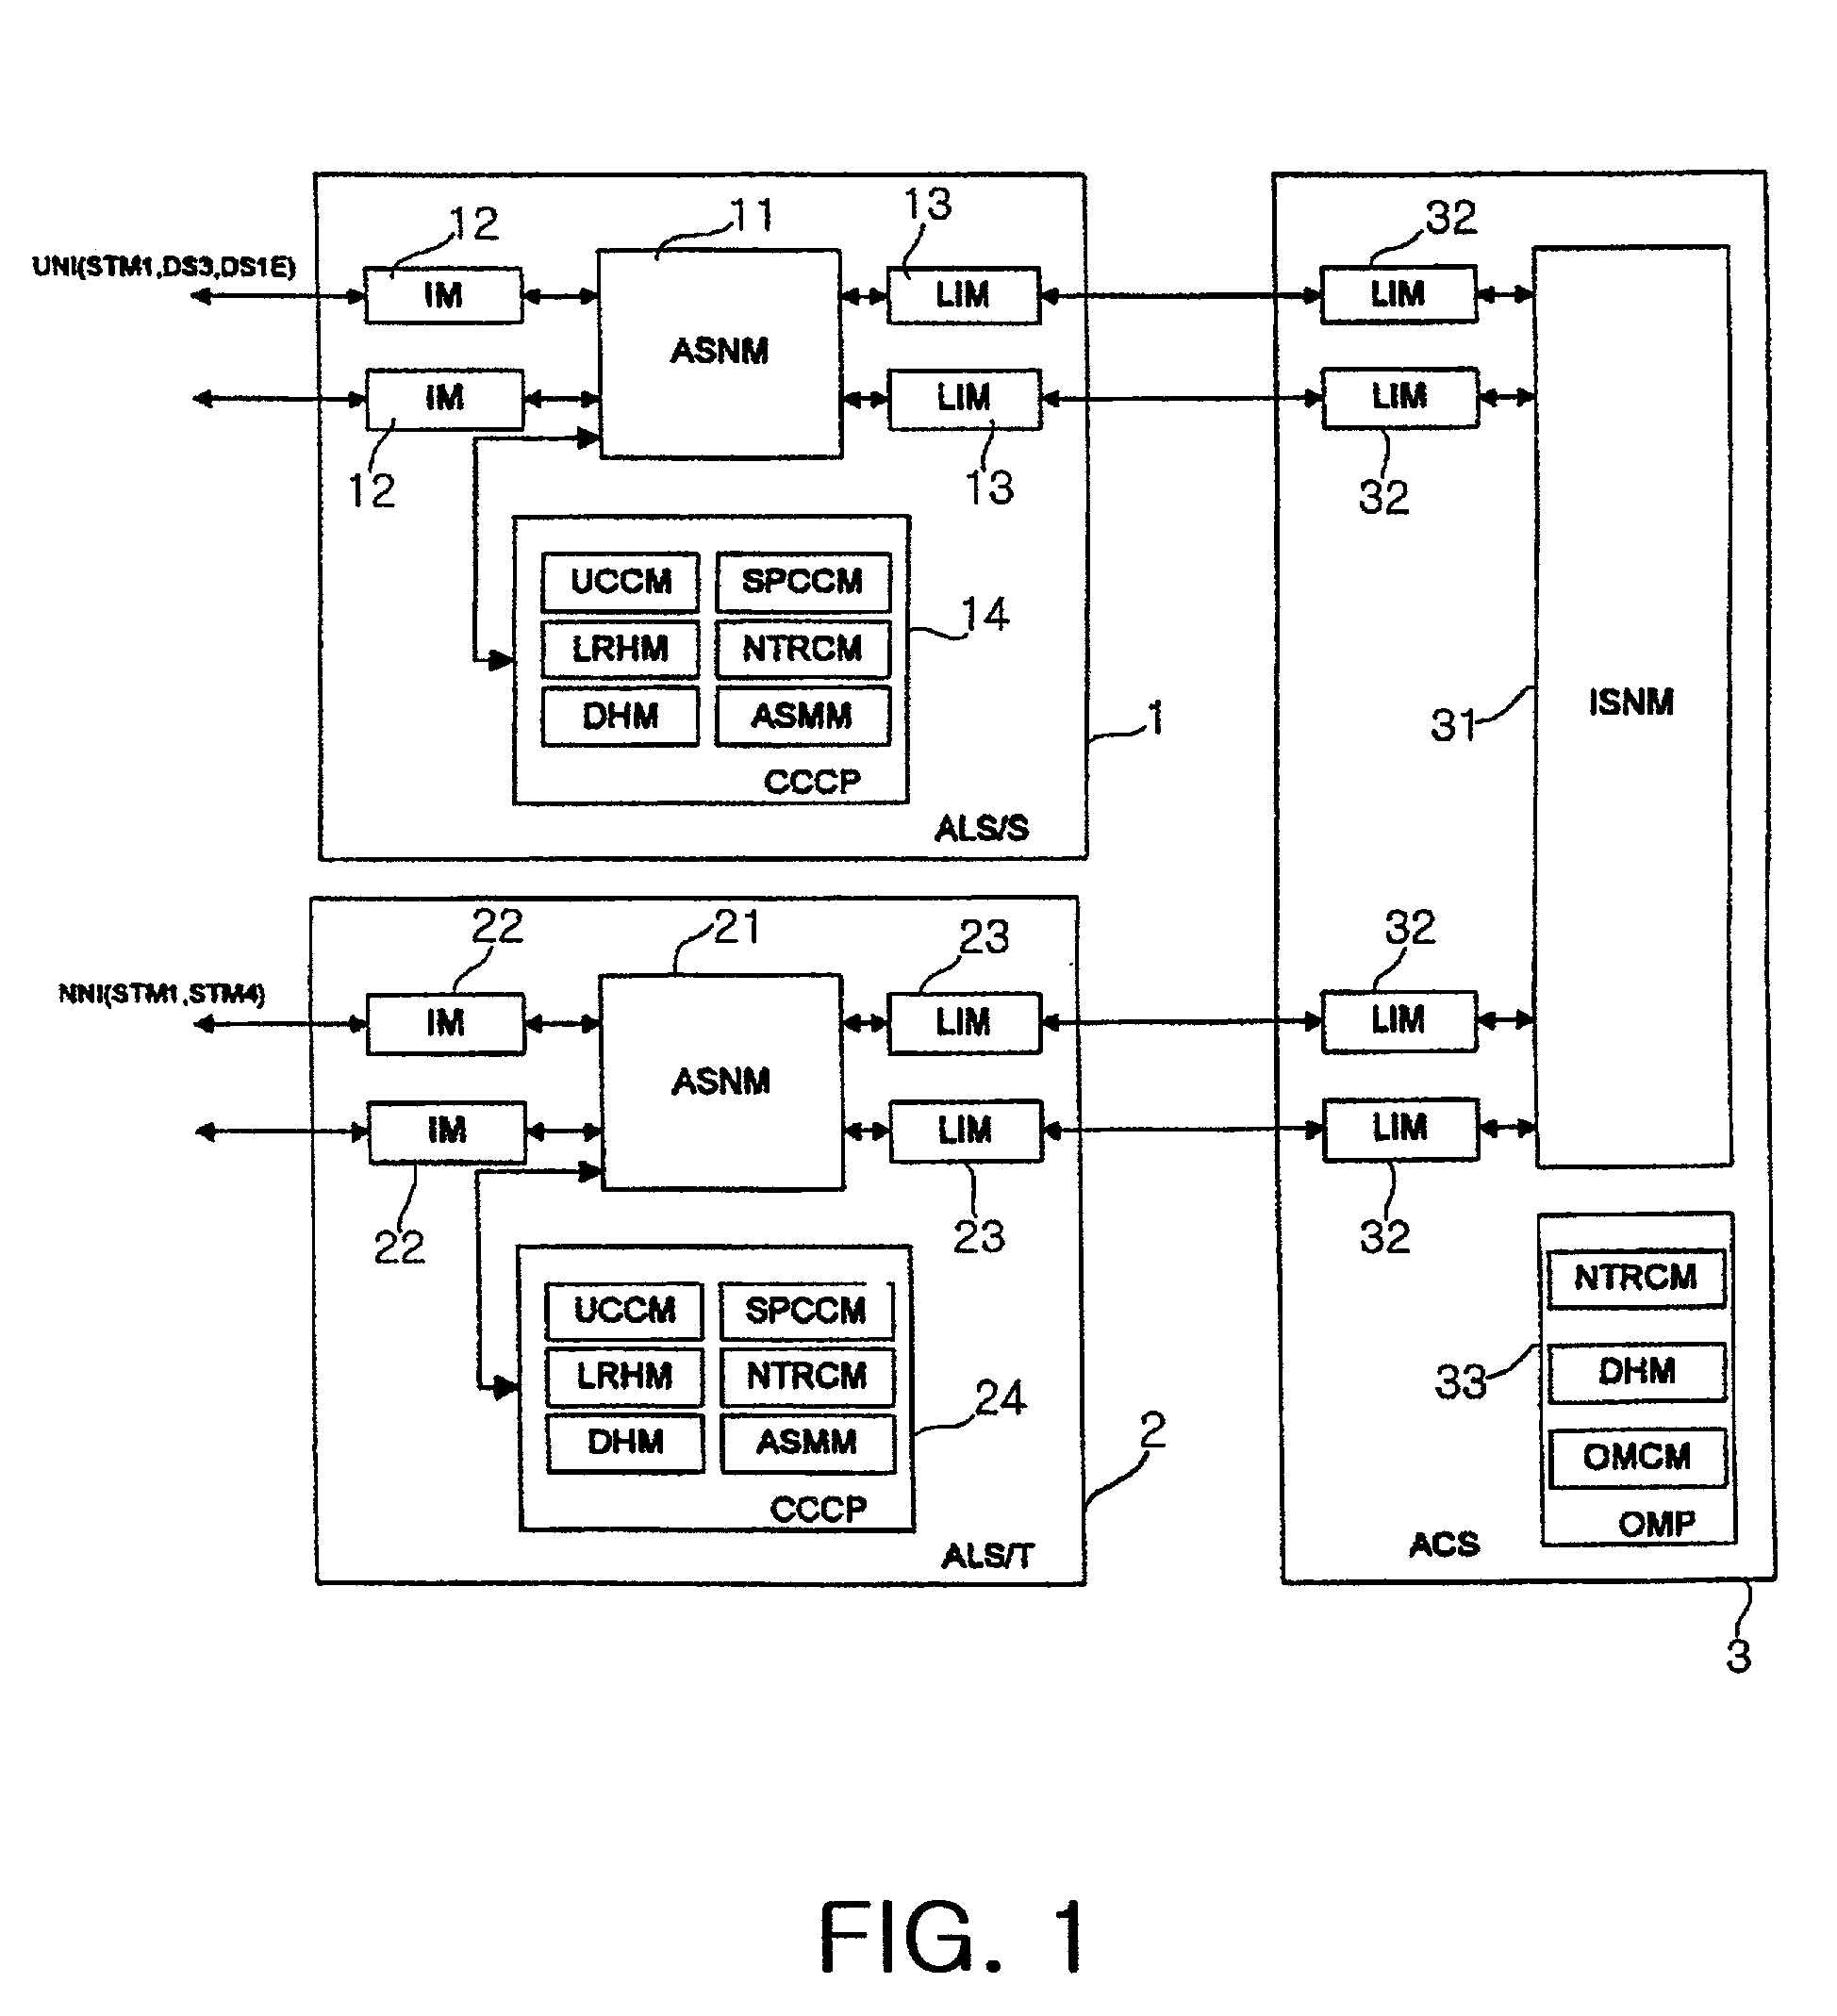 Method for summarizing default address of PNNI lowest level node in ATM switching system